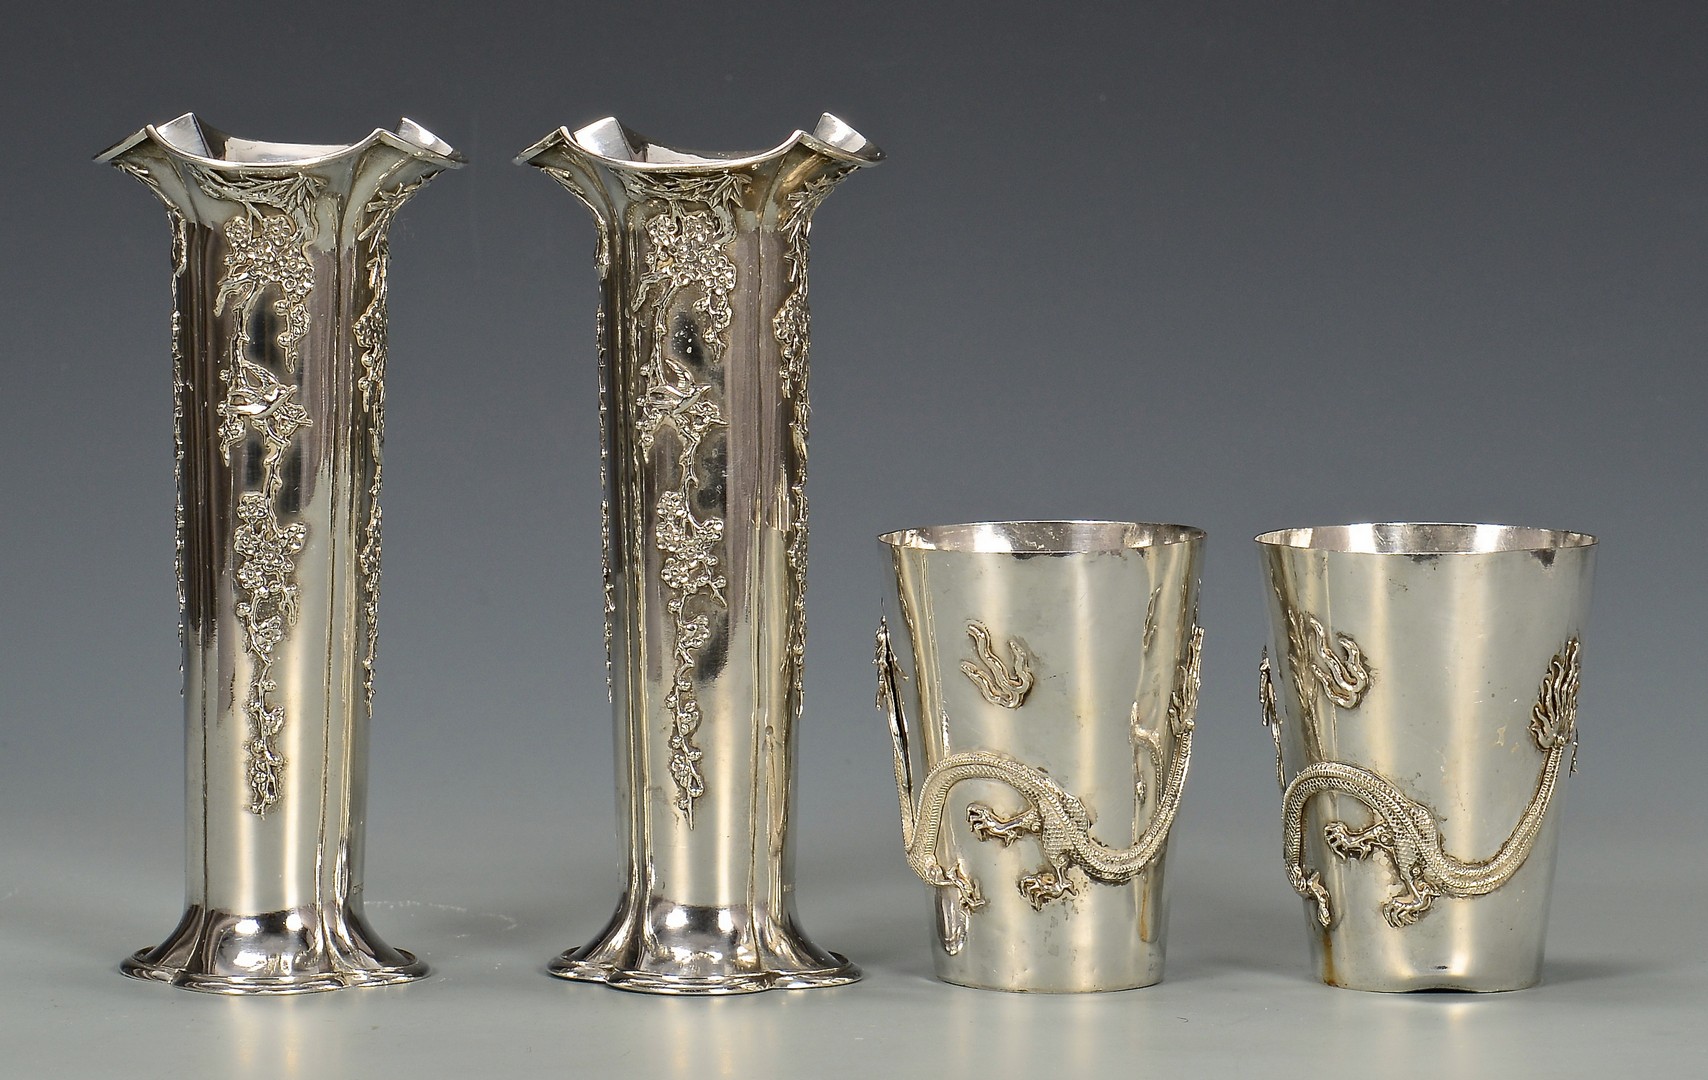 Lot 35: Chinese Export Silver Vases, Cups